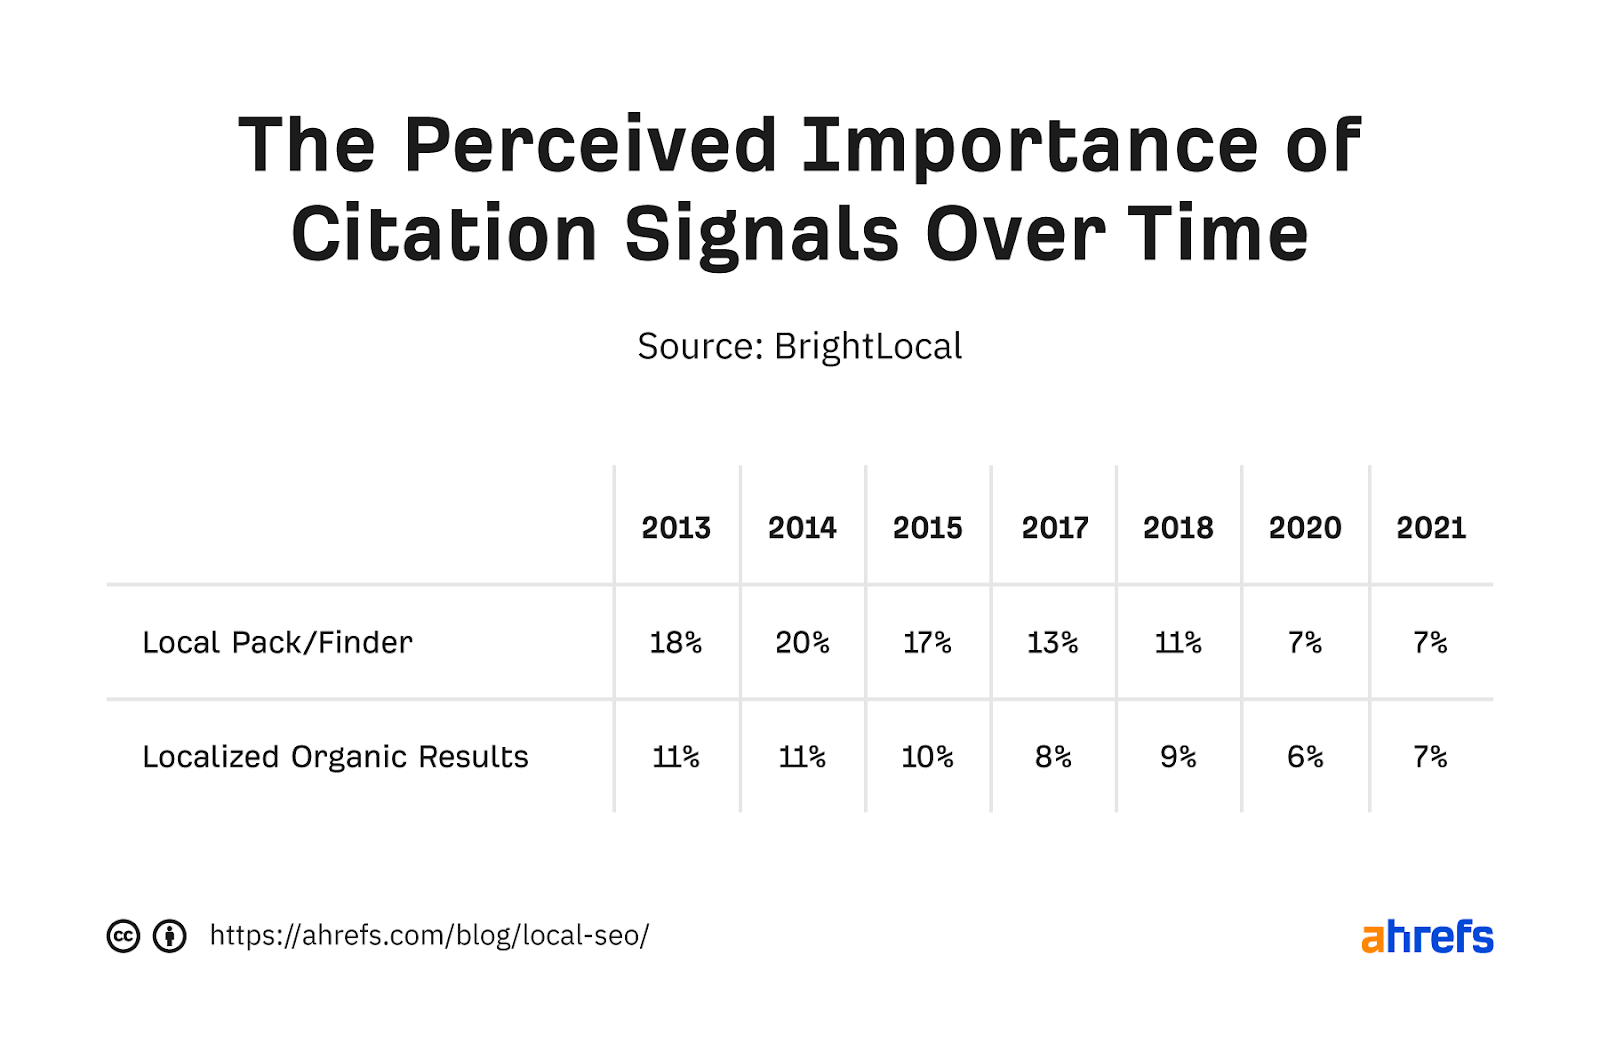 Citations perceived importance over time